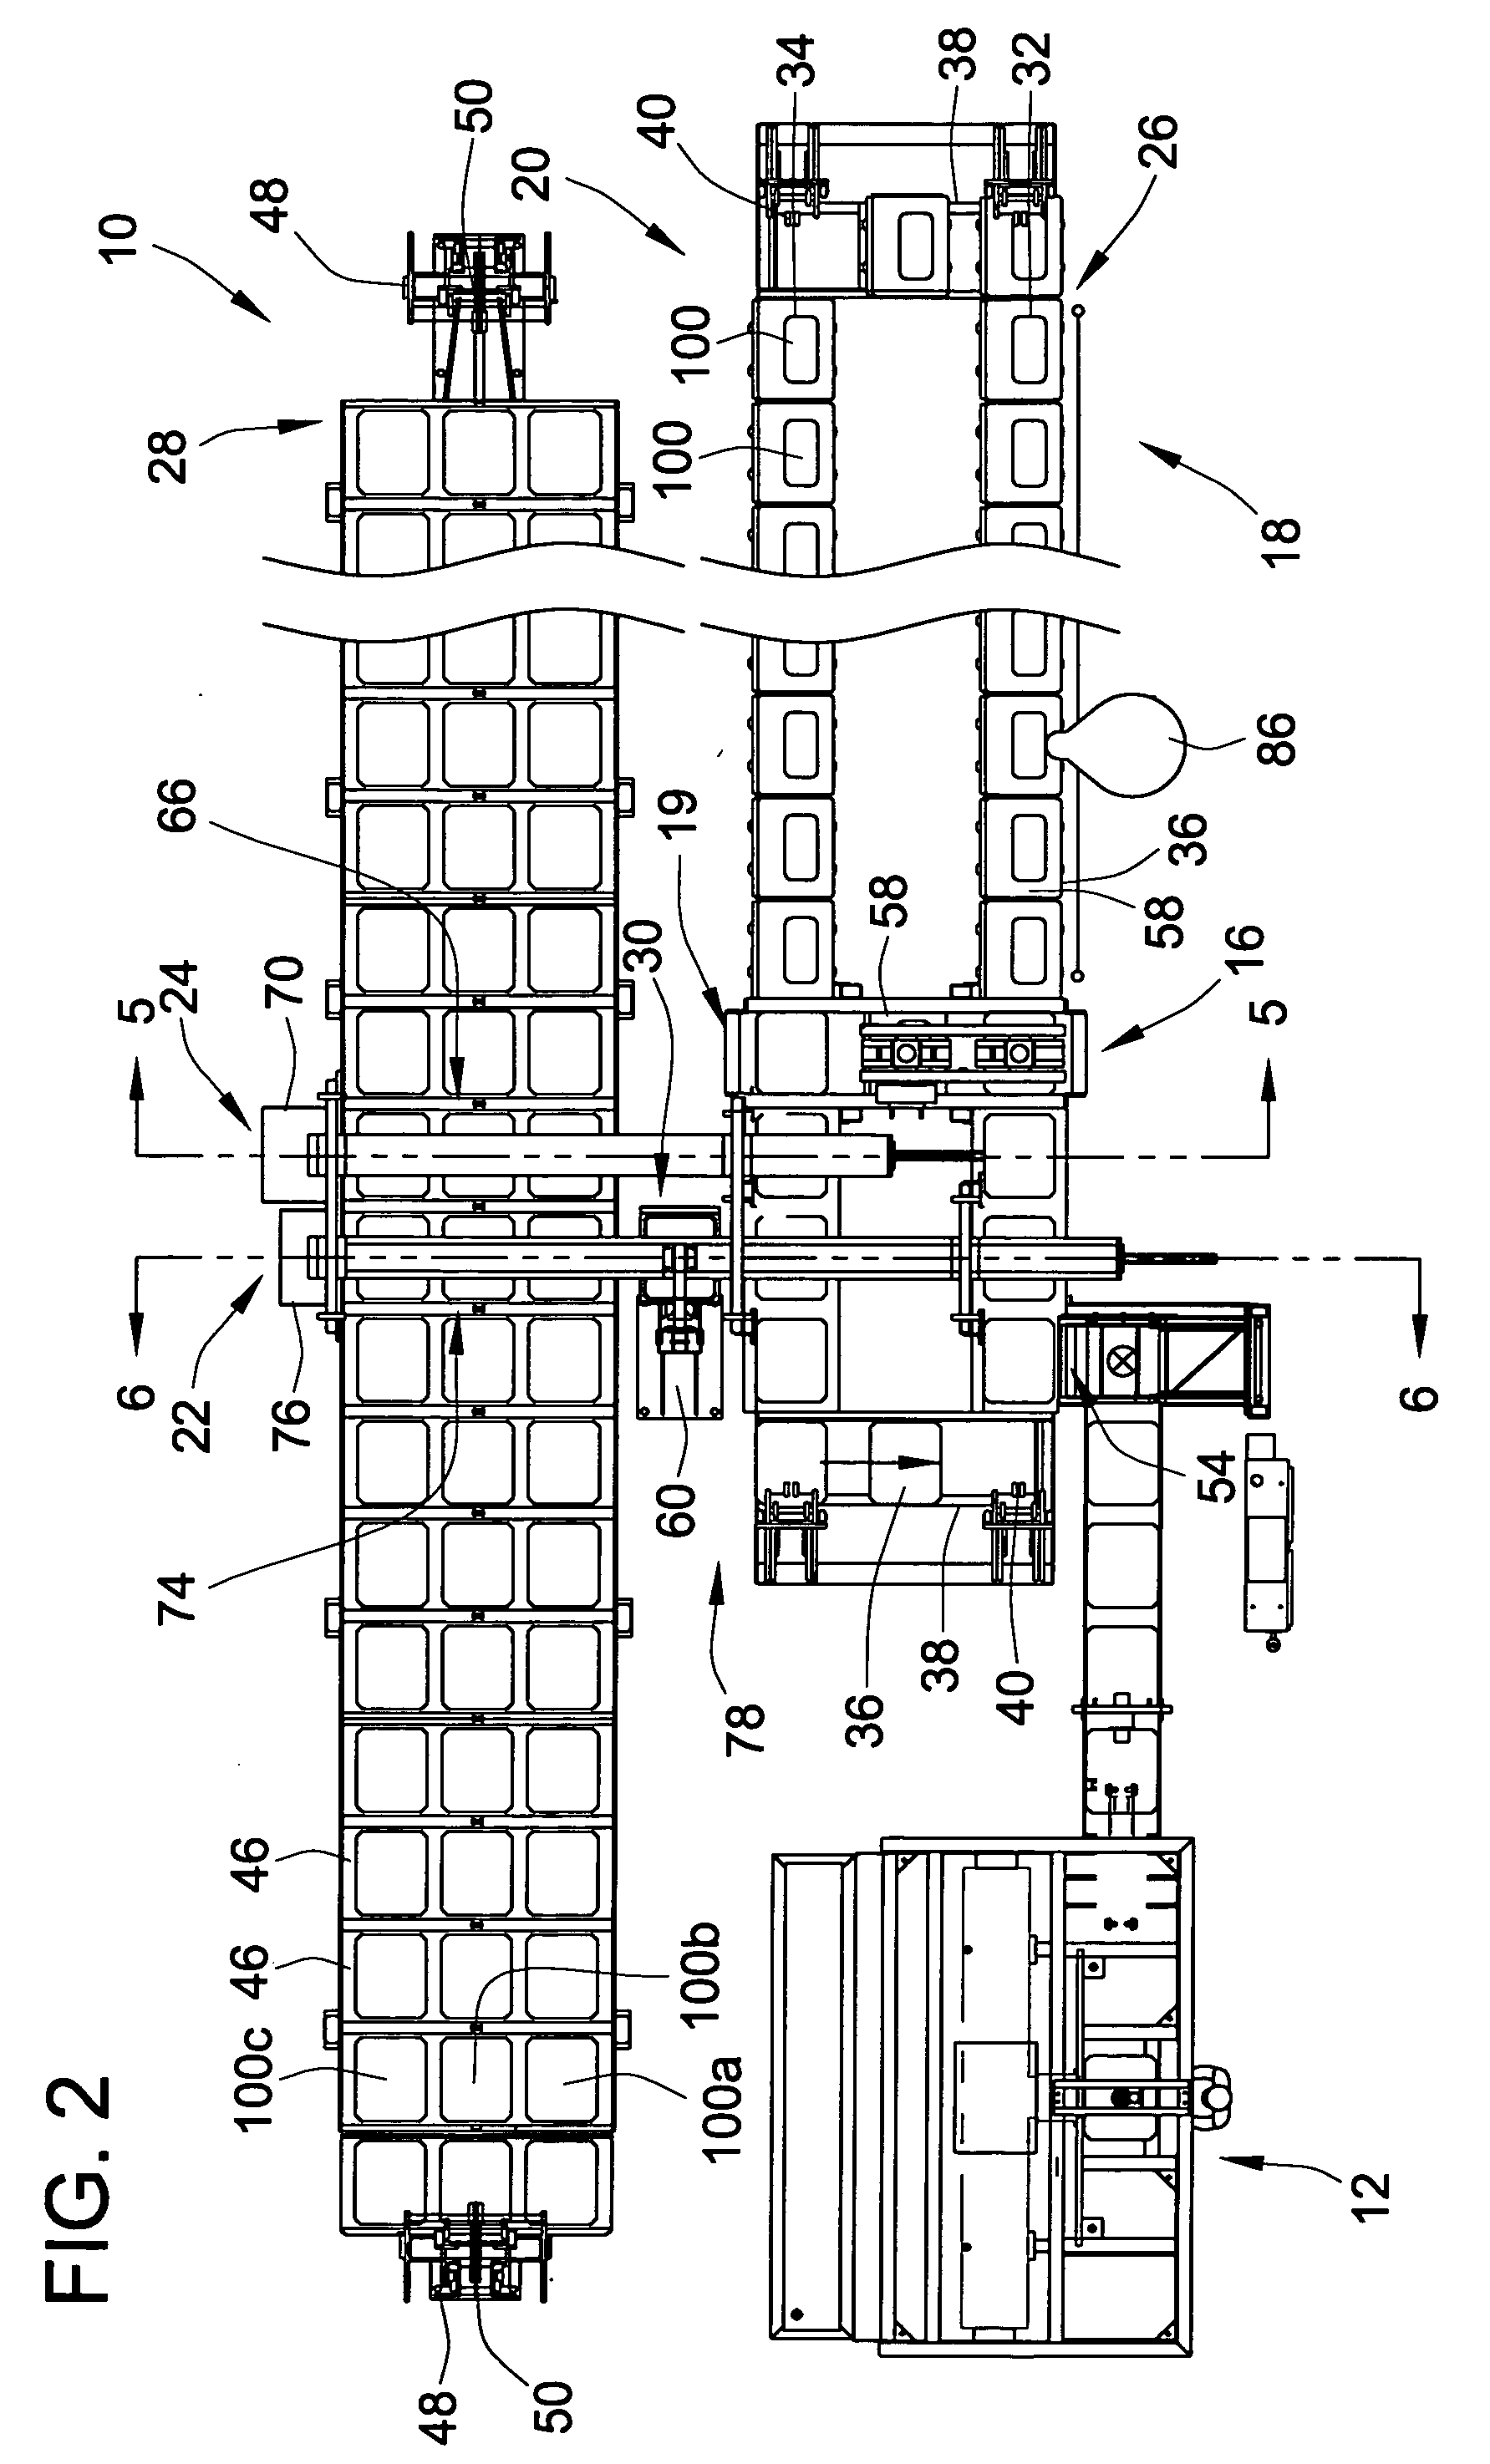 Foundry mold handling system with multiple dump outputs and method